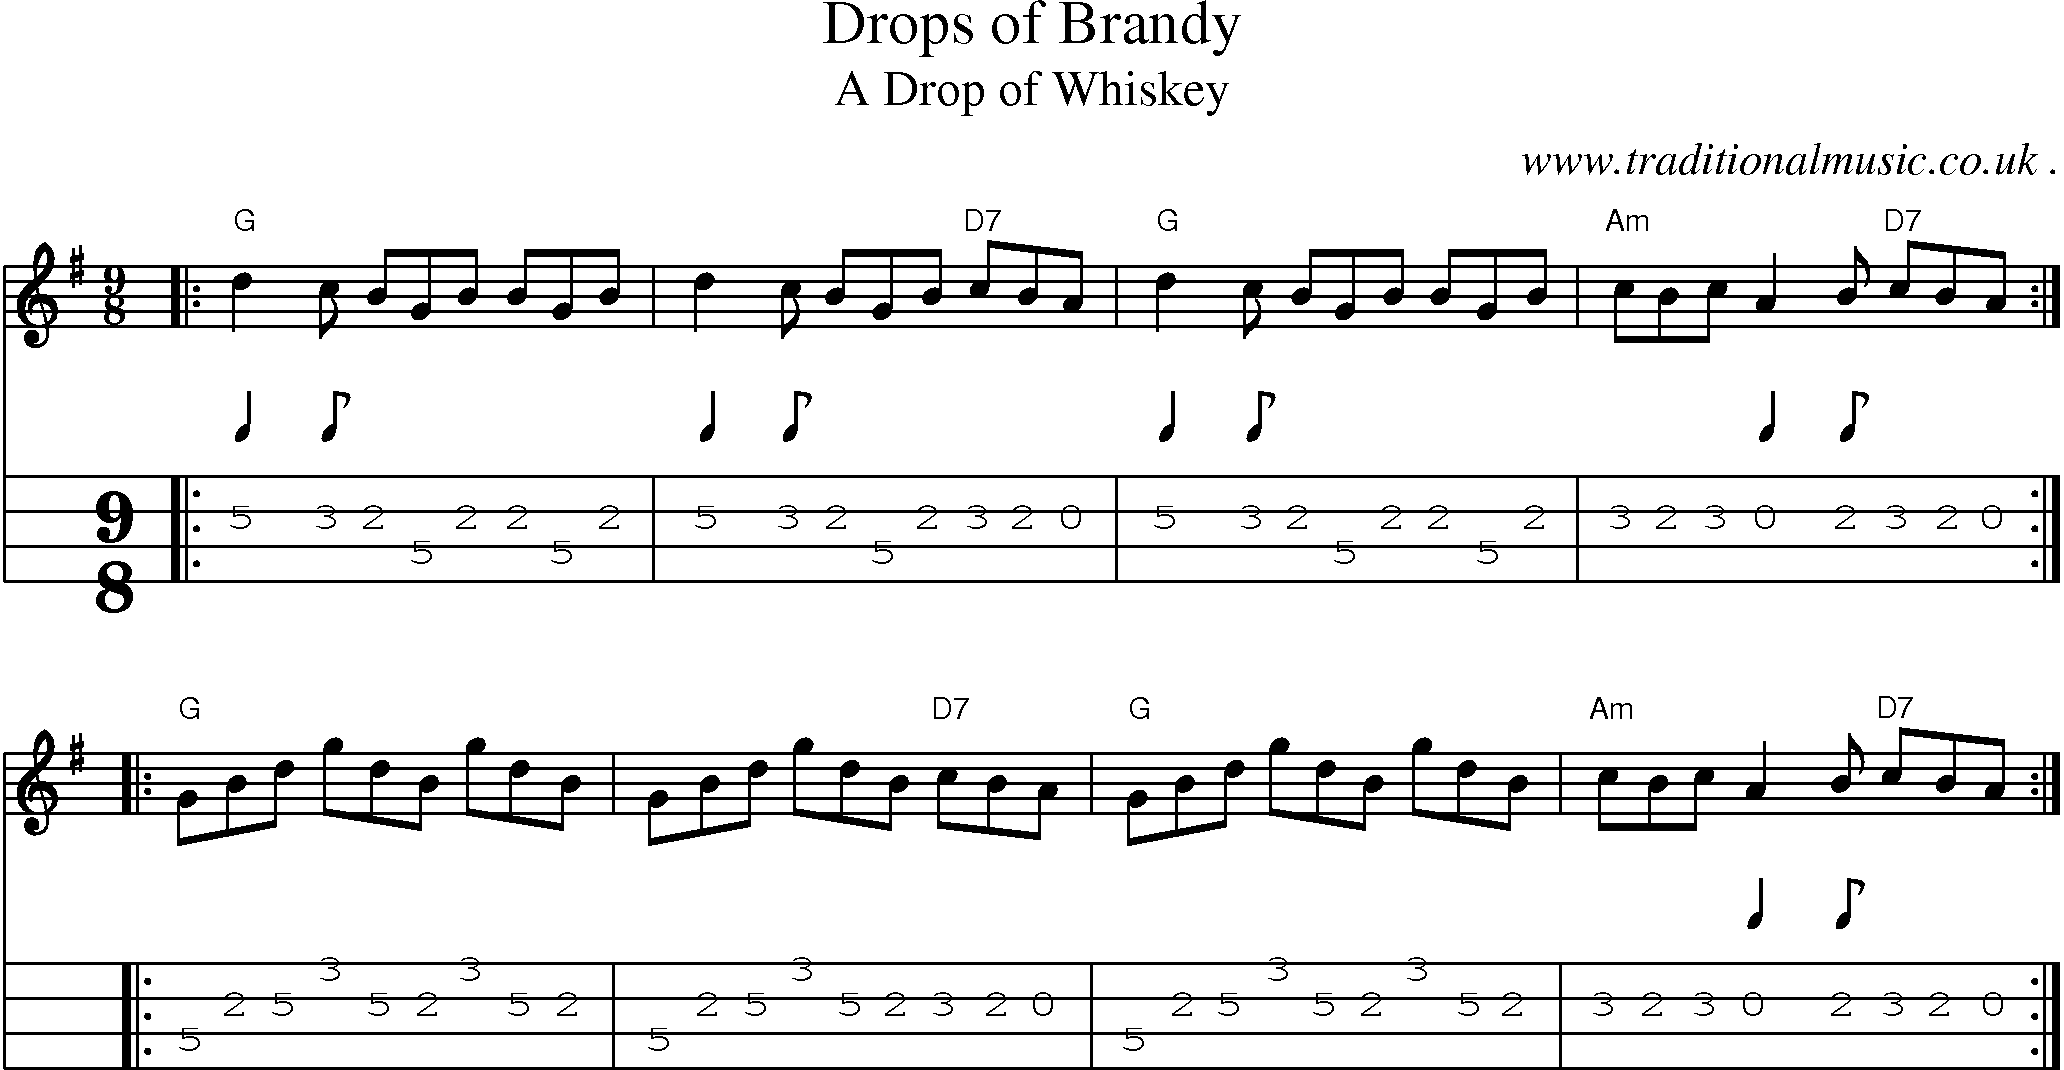 Sheet-music  score, Chords and Mandolin Tabs for Drops Of Brandy